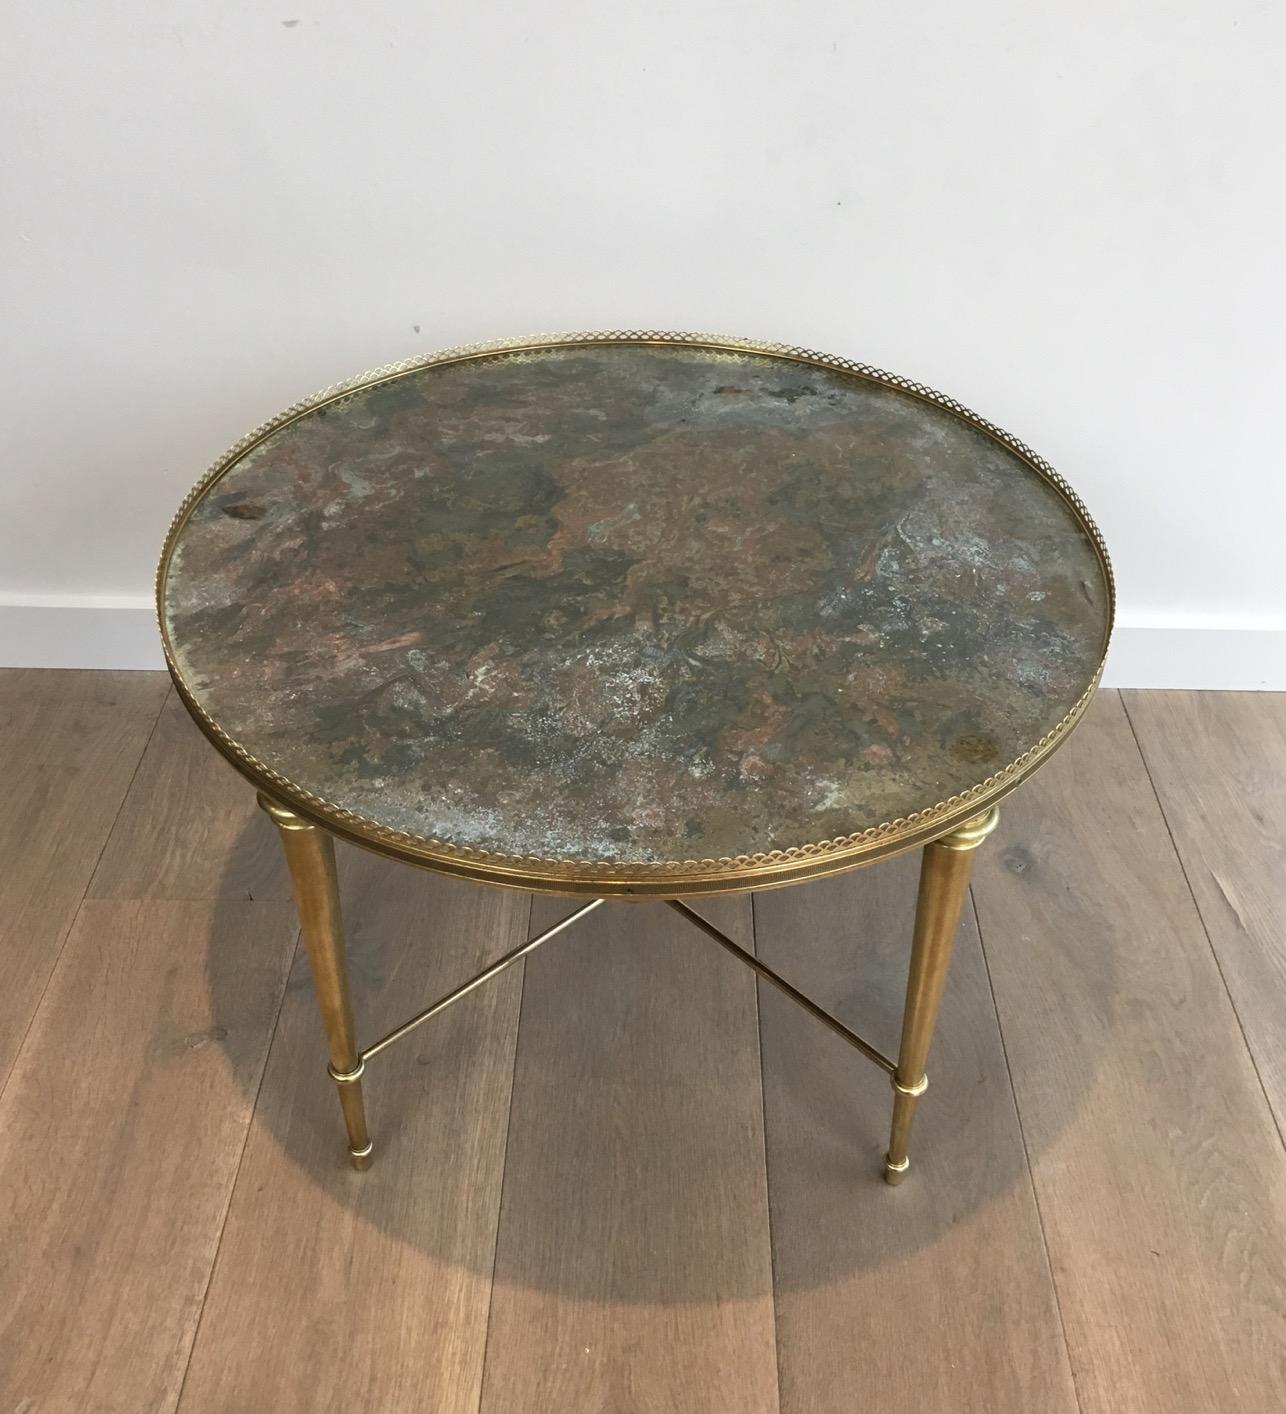 This neoclassical round coffee table is made of elegant brass feet joigned by a stretcher on which centre is a nice finial. The top is made of a beautiful verre églomisé surrounded by a fine brass gallery. This cocktail table was made by French